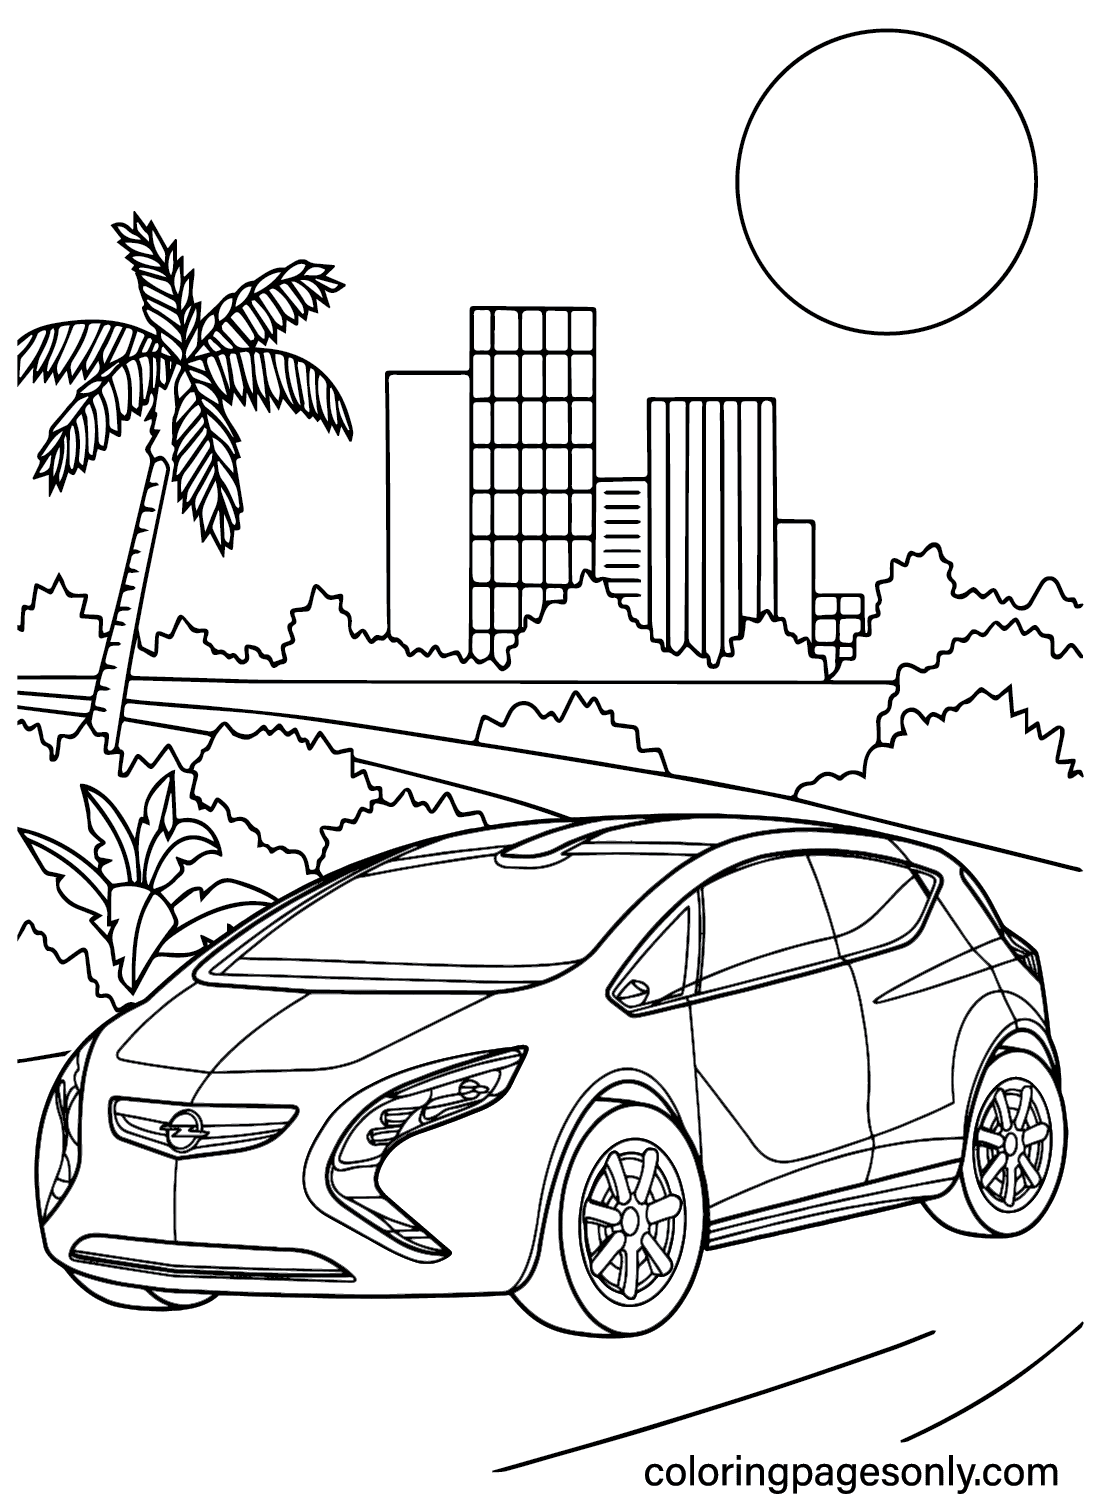 Opel Flextreme Coloring Page from Opel